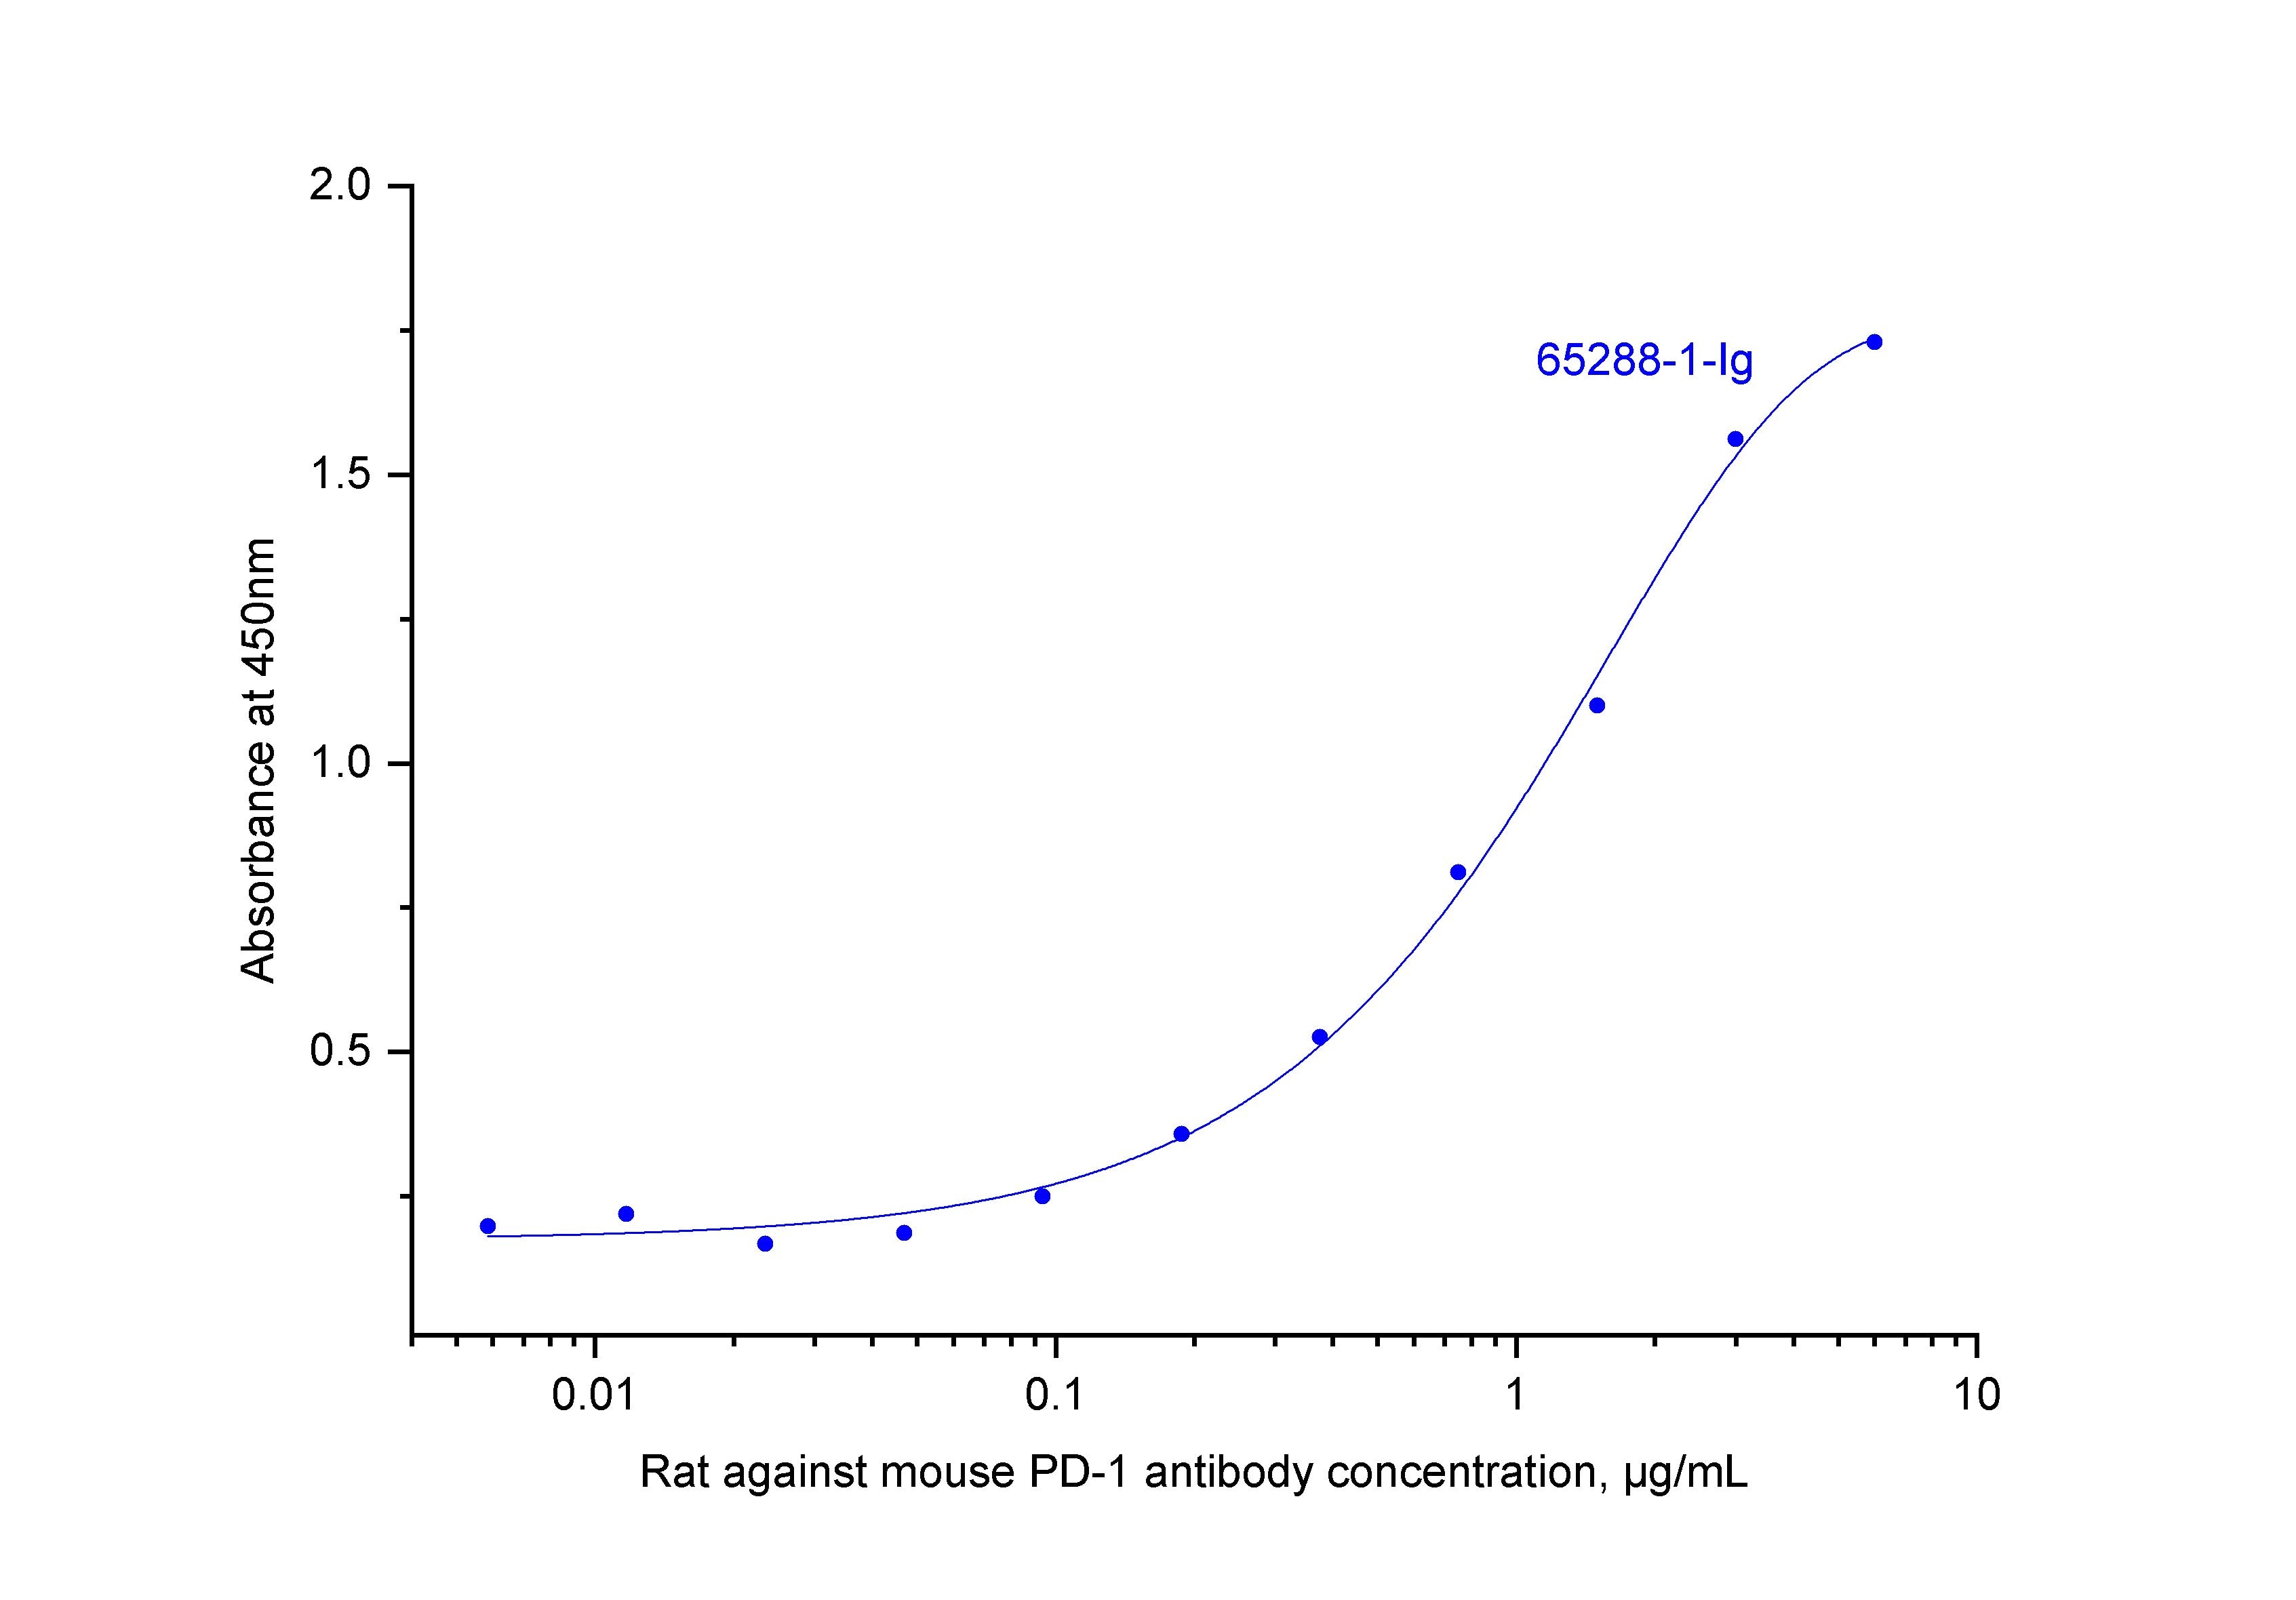 ELISA experiment of Mouse PD-1 protein using Anti-Mouse CD279 (PD-1) (RMP1-14) (65288-1-Ig)